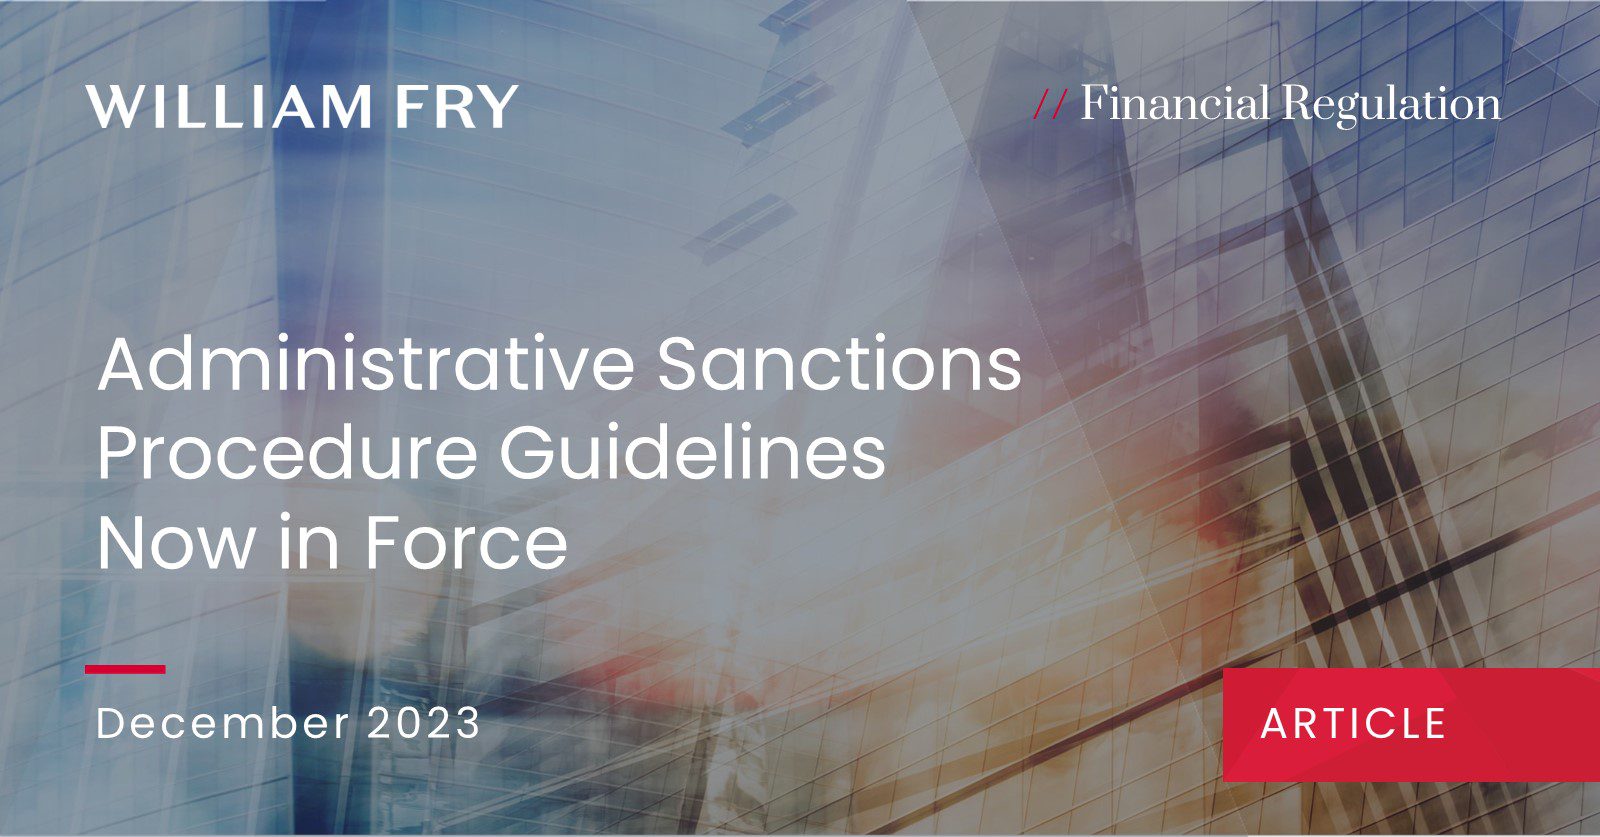 Administrative Sanctions Procedure Guidelines Now in Force